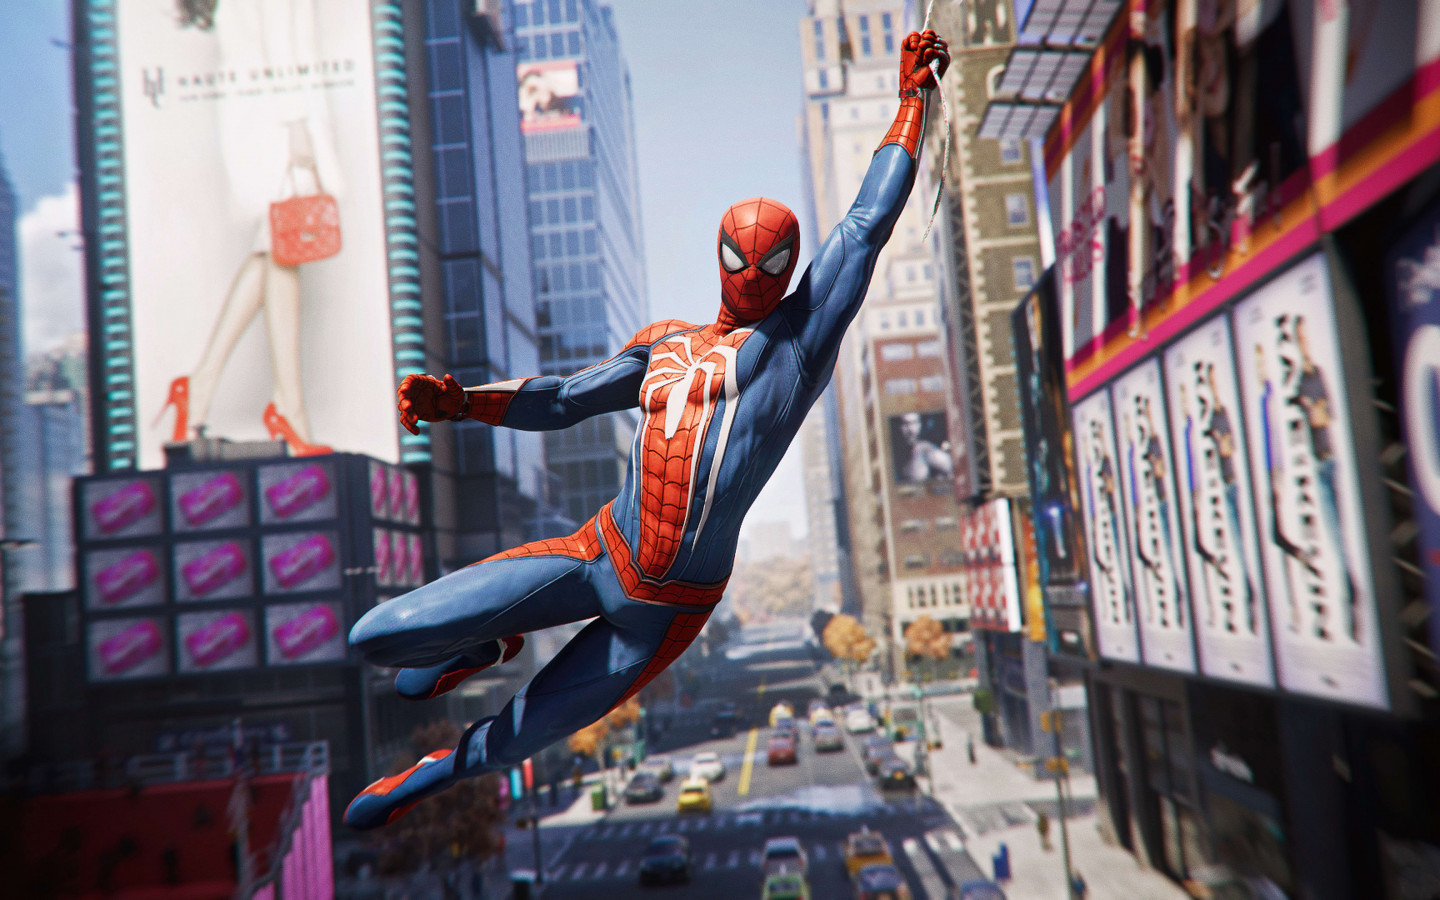 Spider Man from the video game wallpaper 1440x900